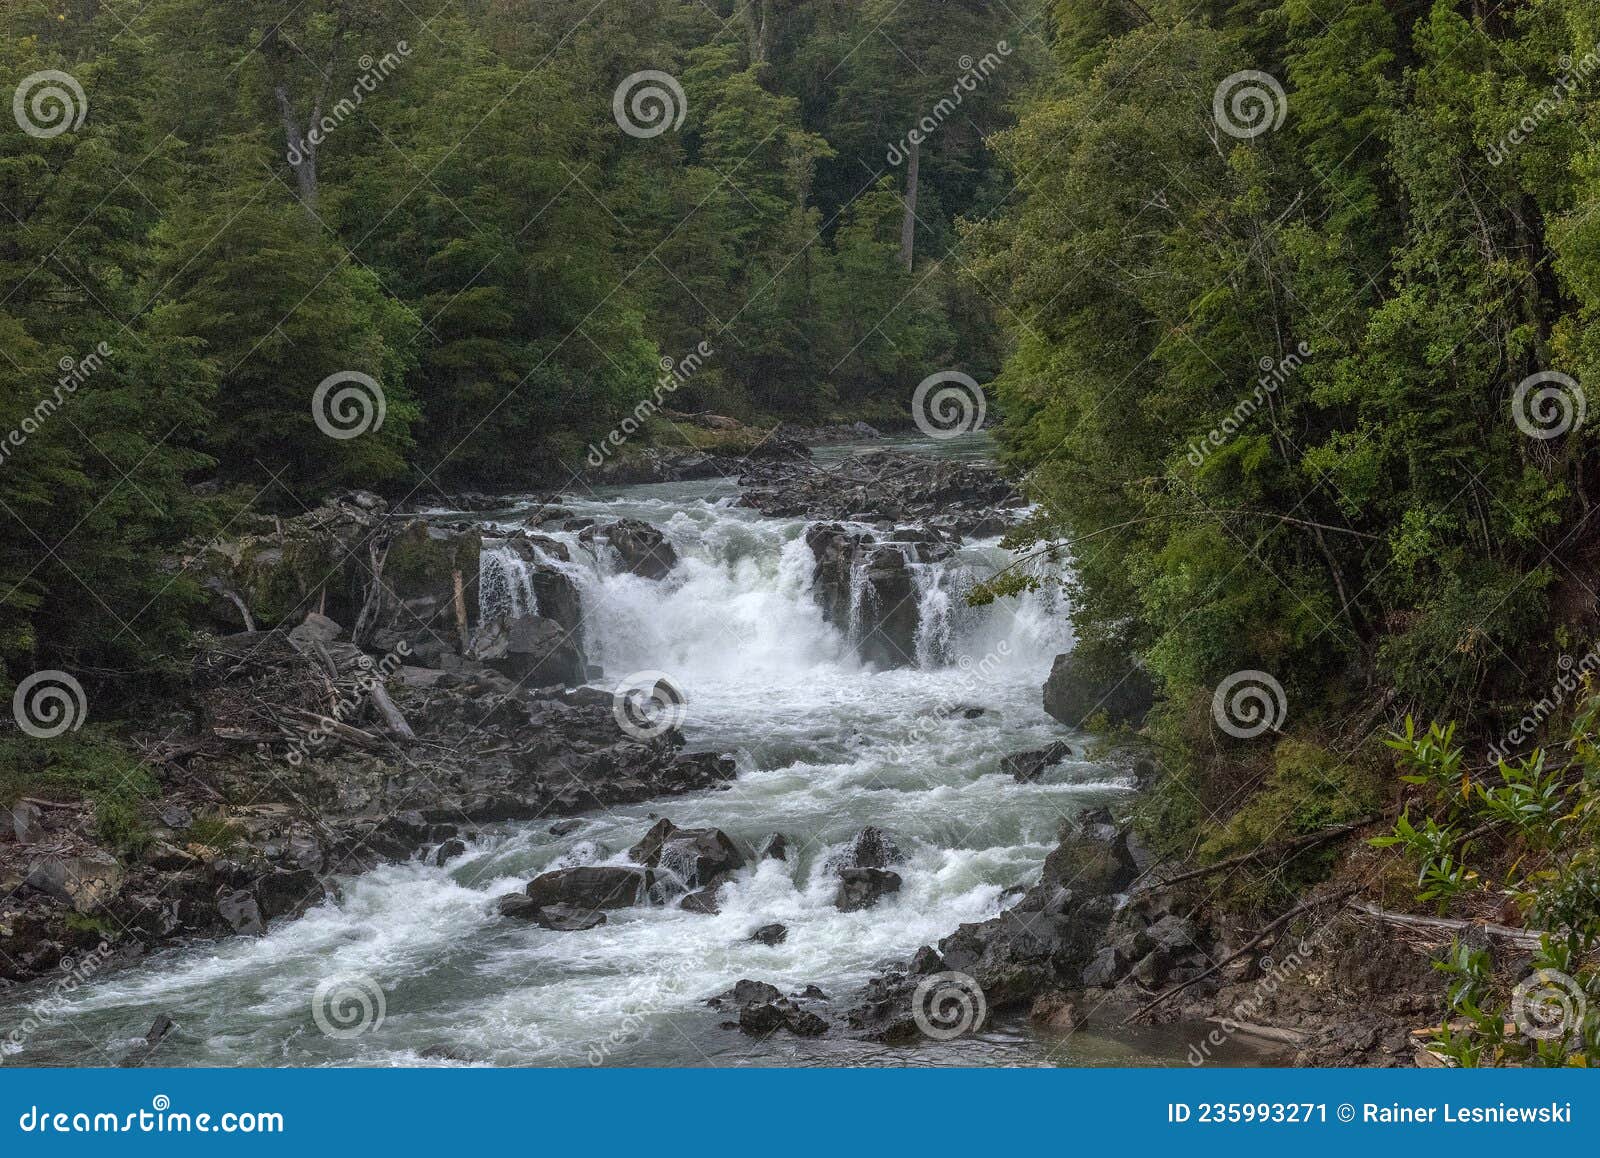 the salto los novios waterfall in puyehue national park, chile